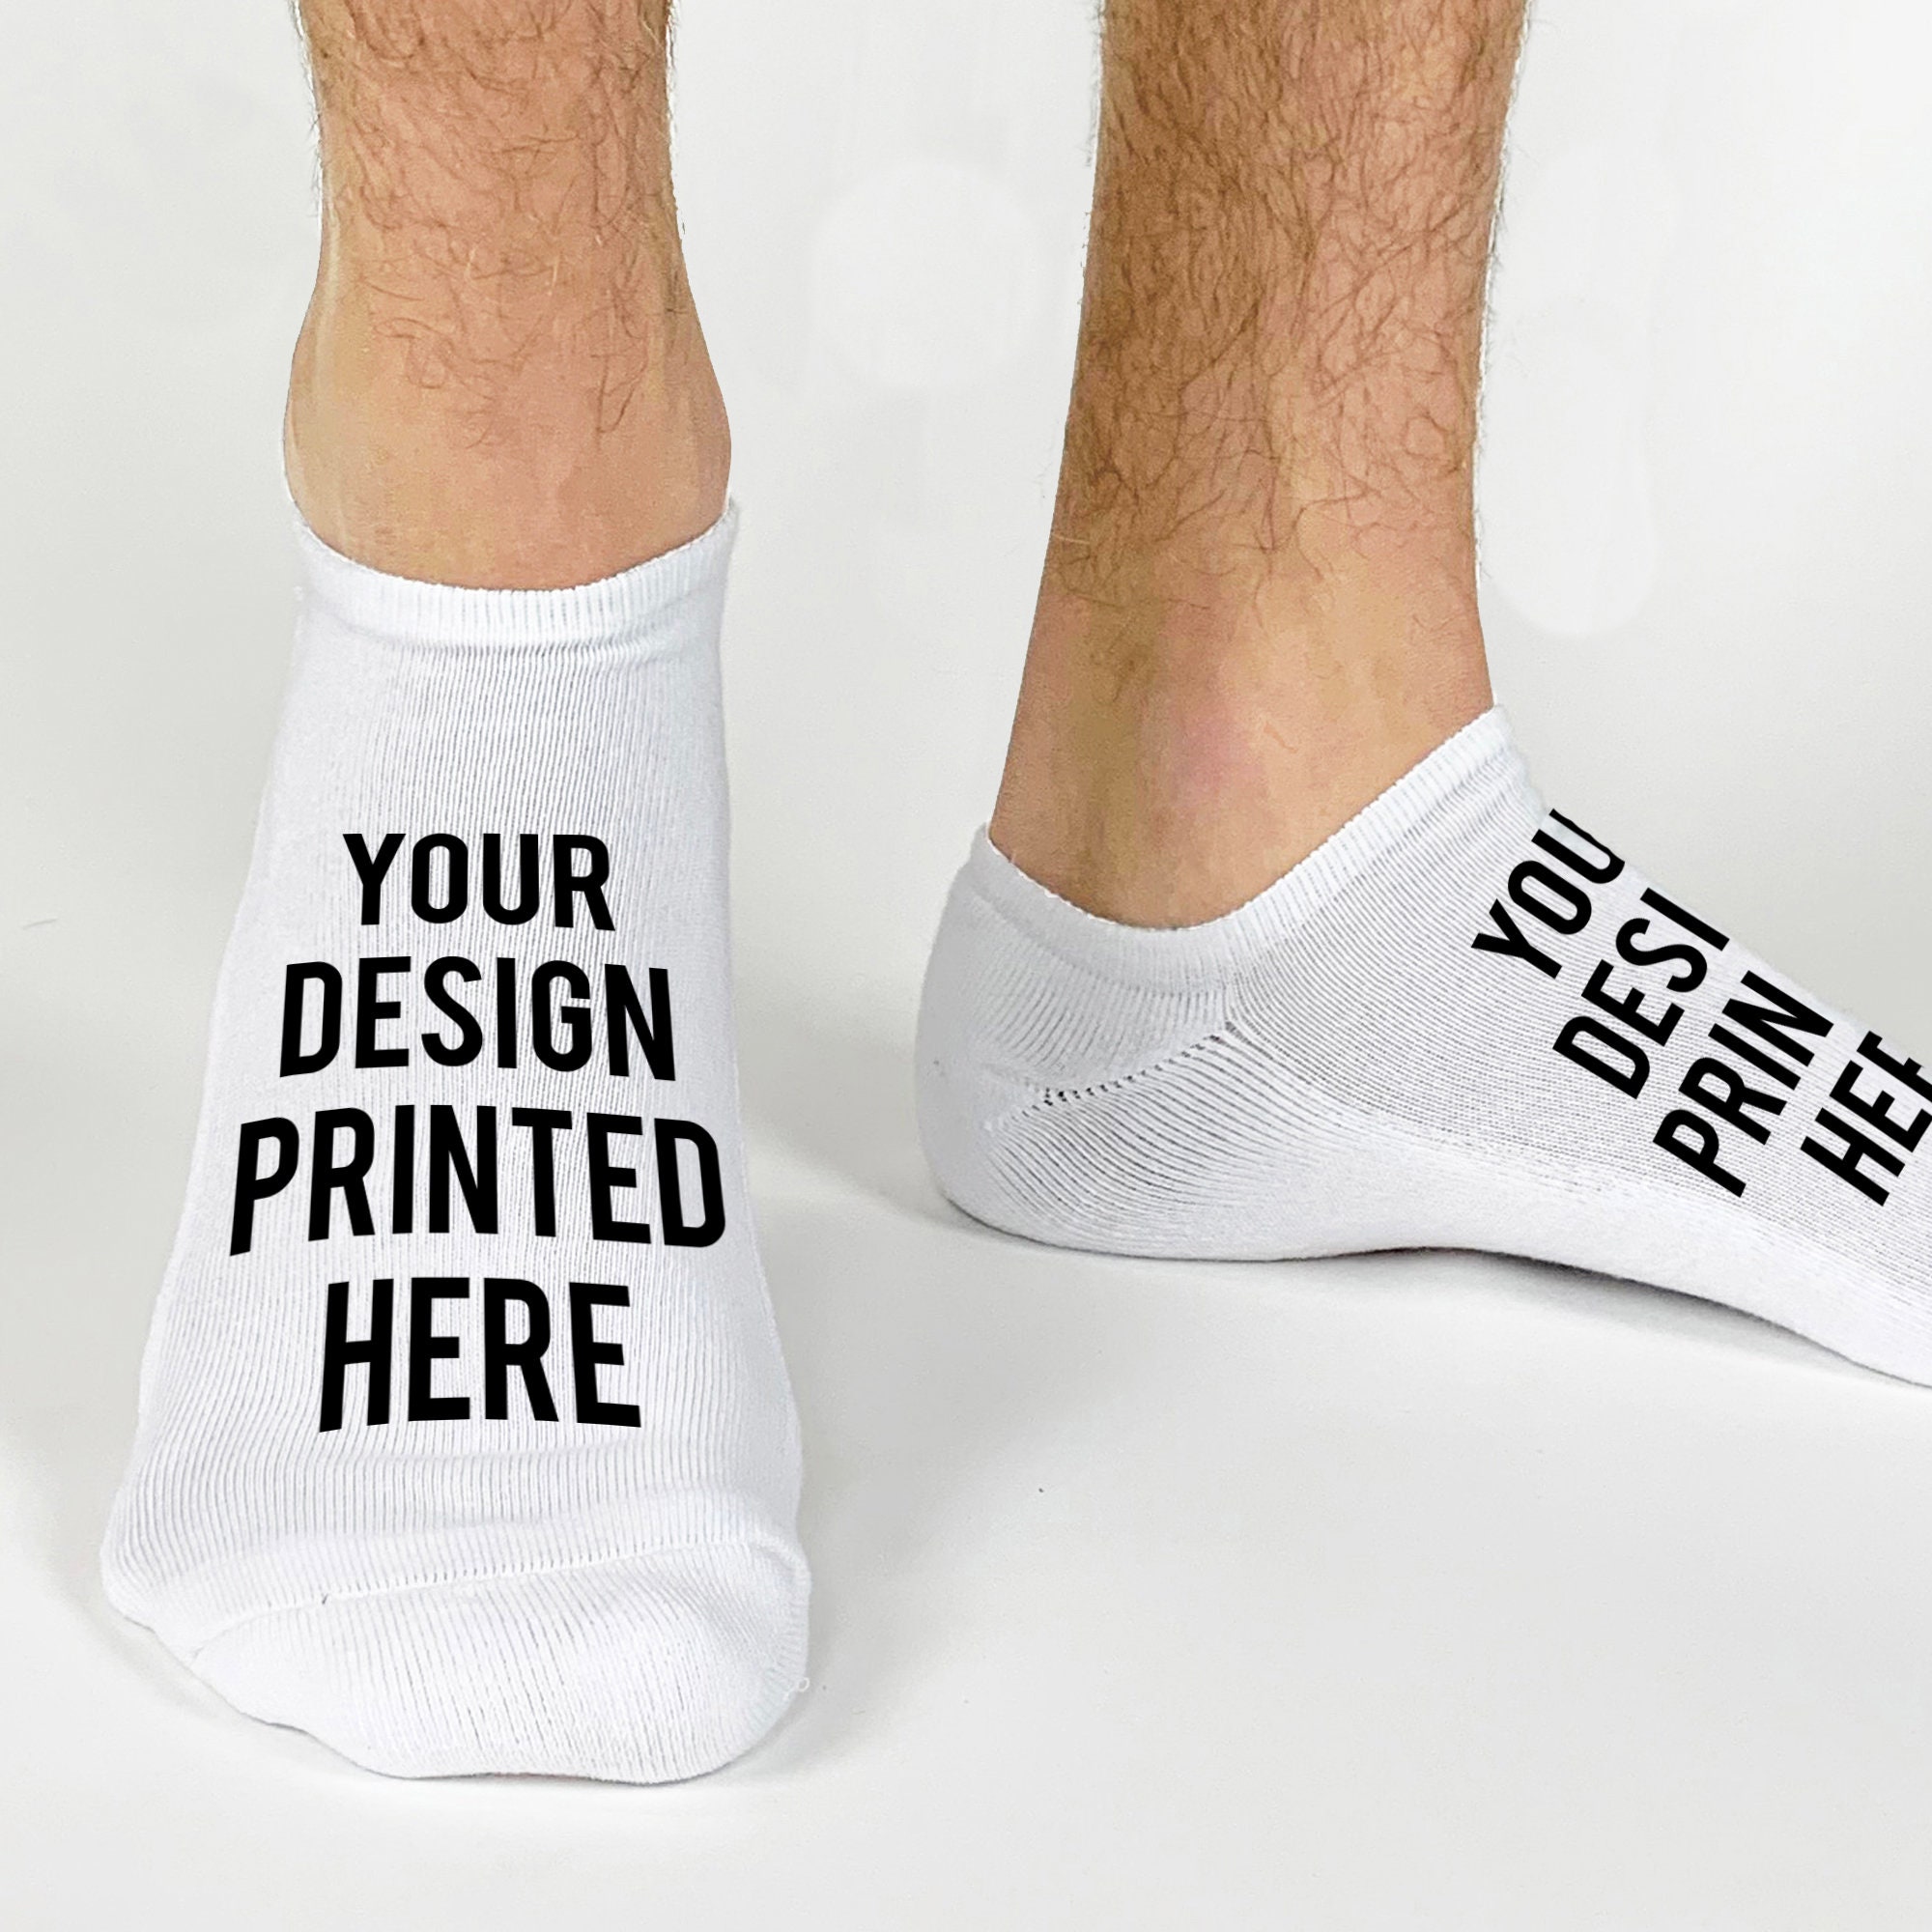 Custom and Personalized No Show Socks for Men, Cool Socks to Add Your Own  Design, Printed on the Top of the Socks 